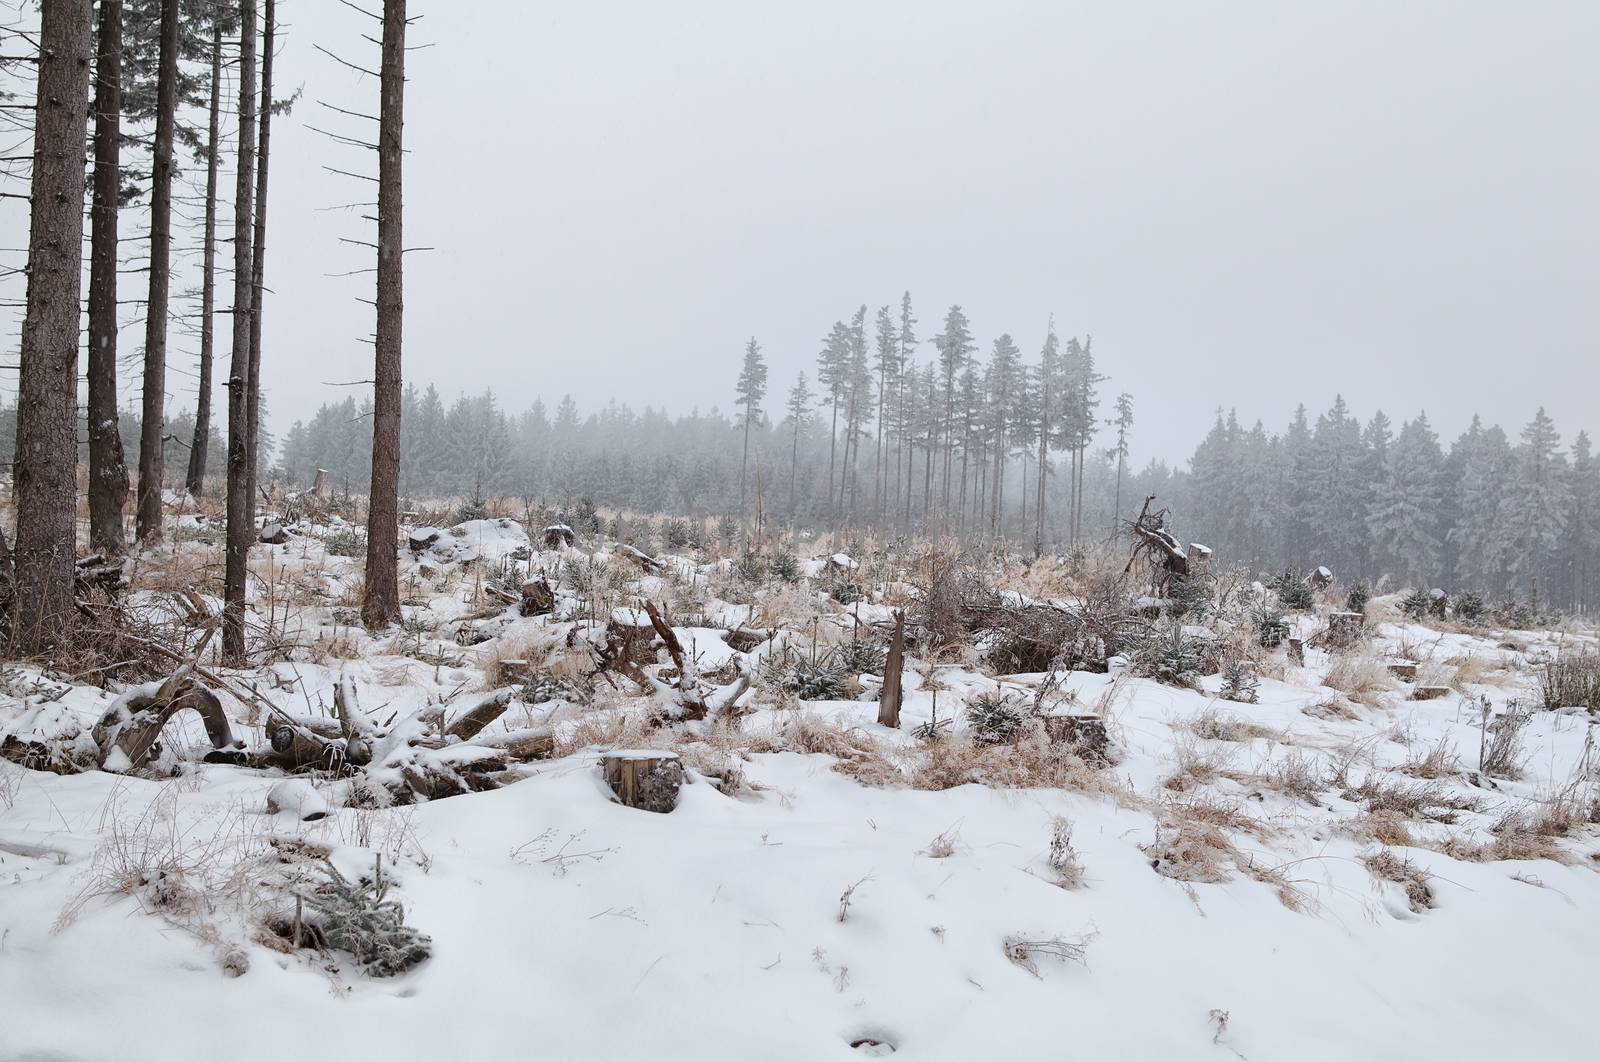 snowing over meadow in coniferous forest by catolla